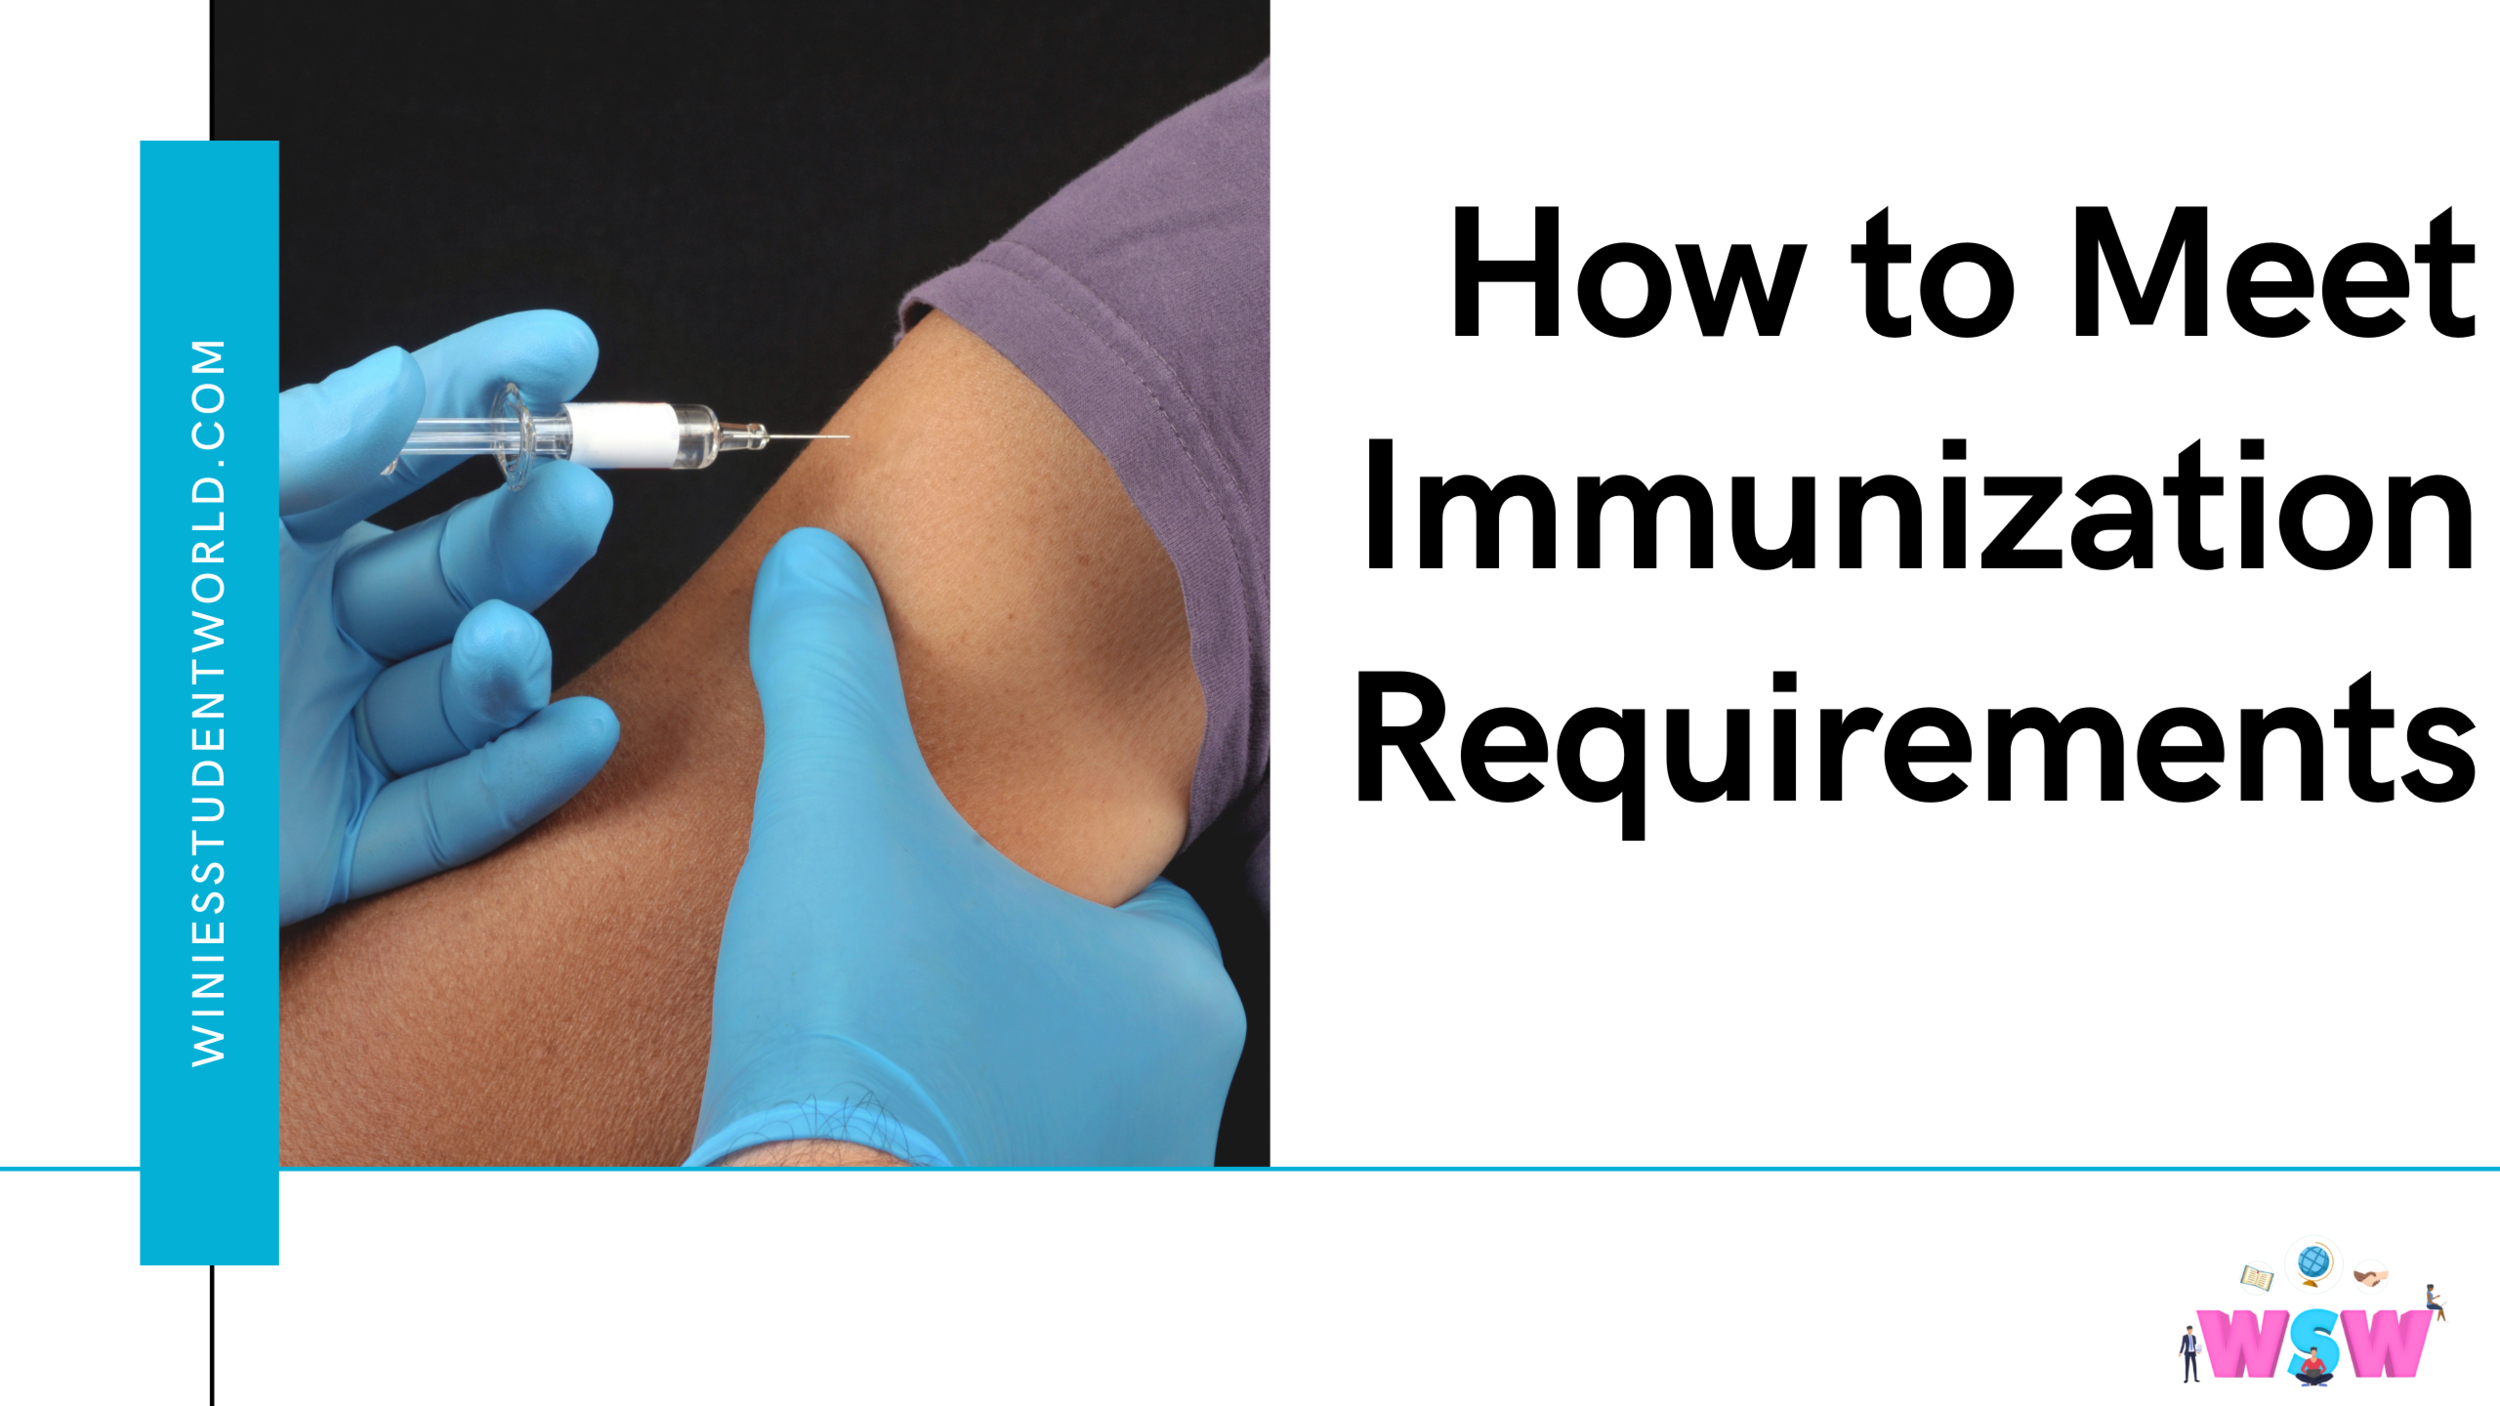 Immunization+Requirements+for+International+Students+to+Study+in+the+United+States+Canada